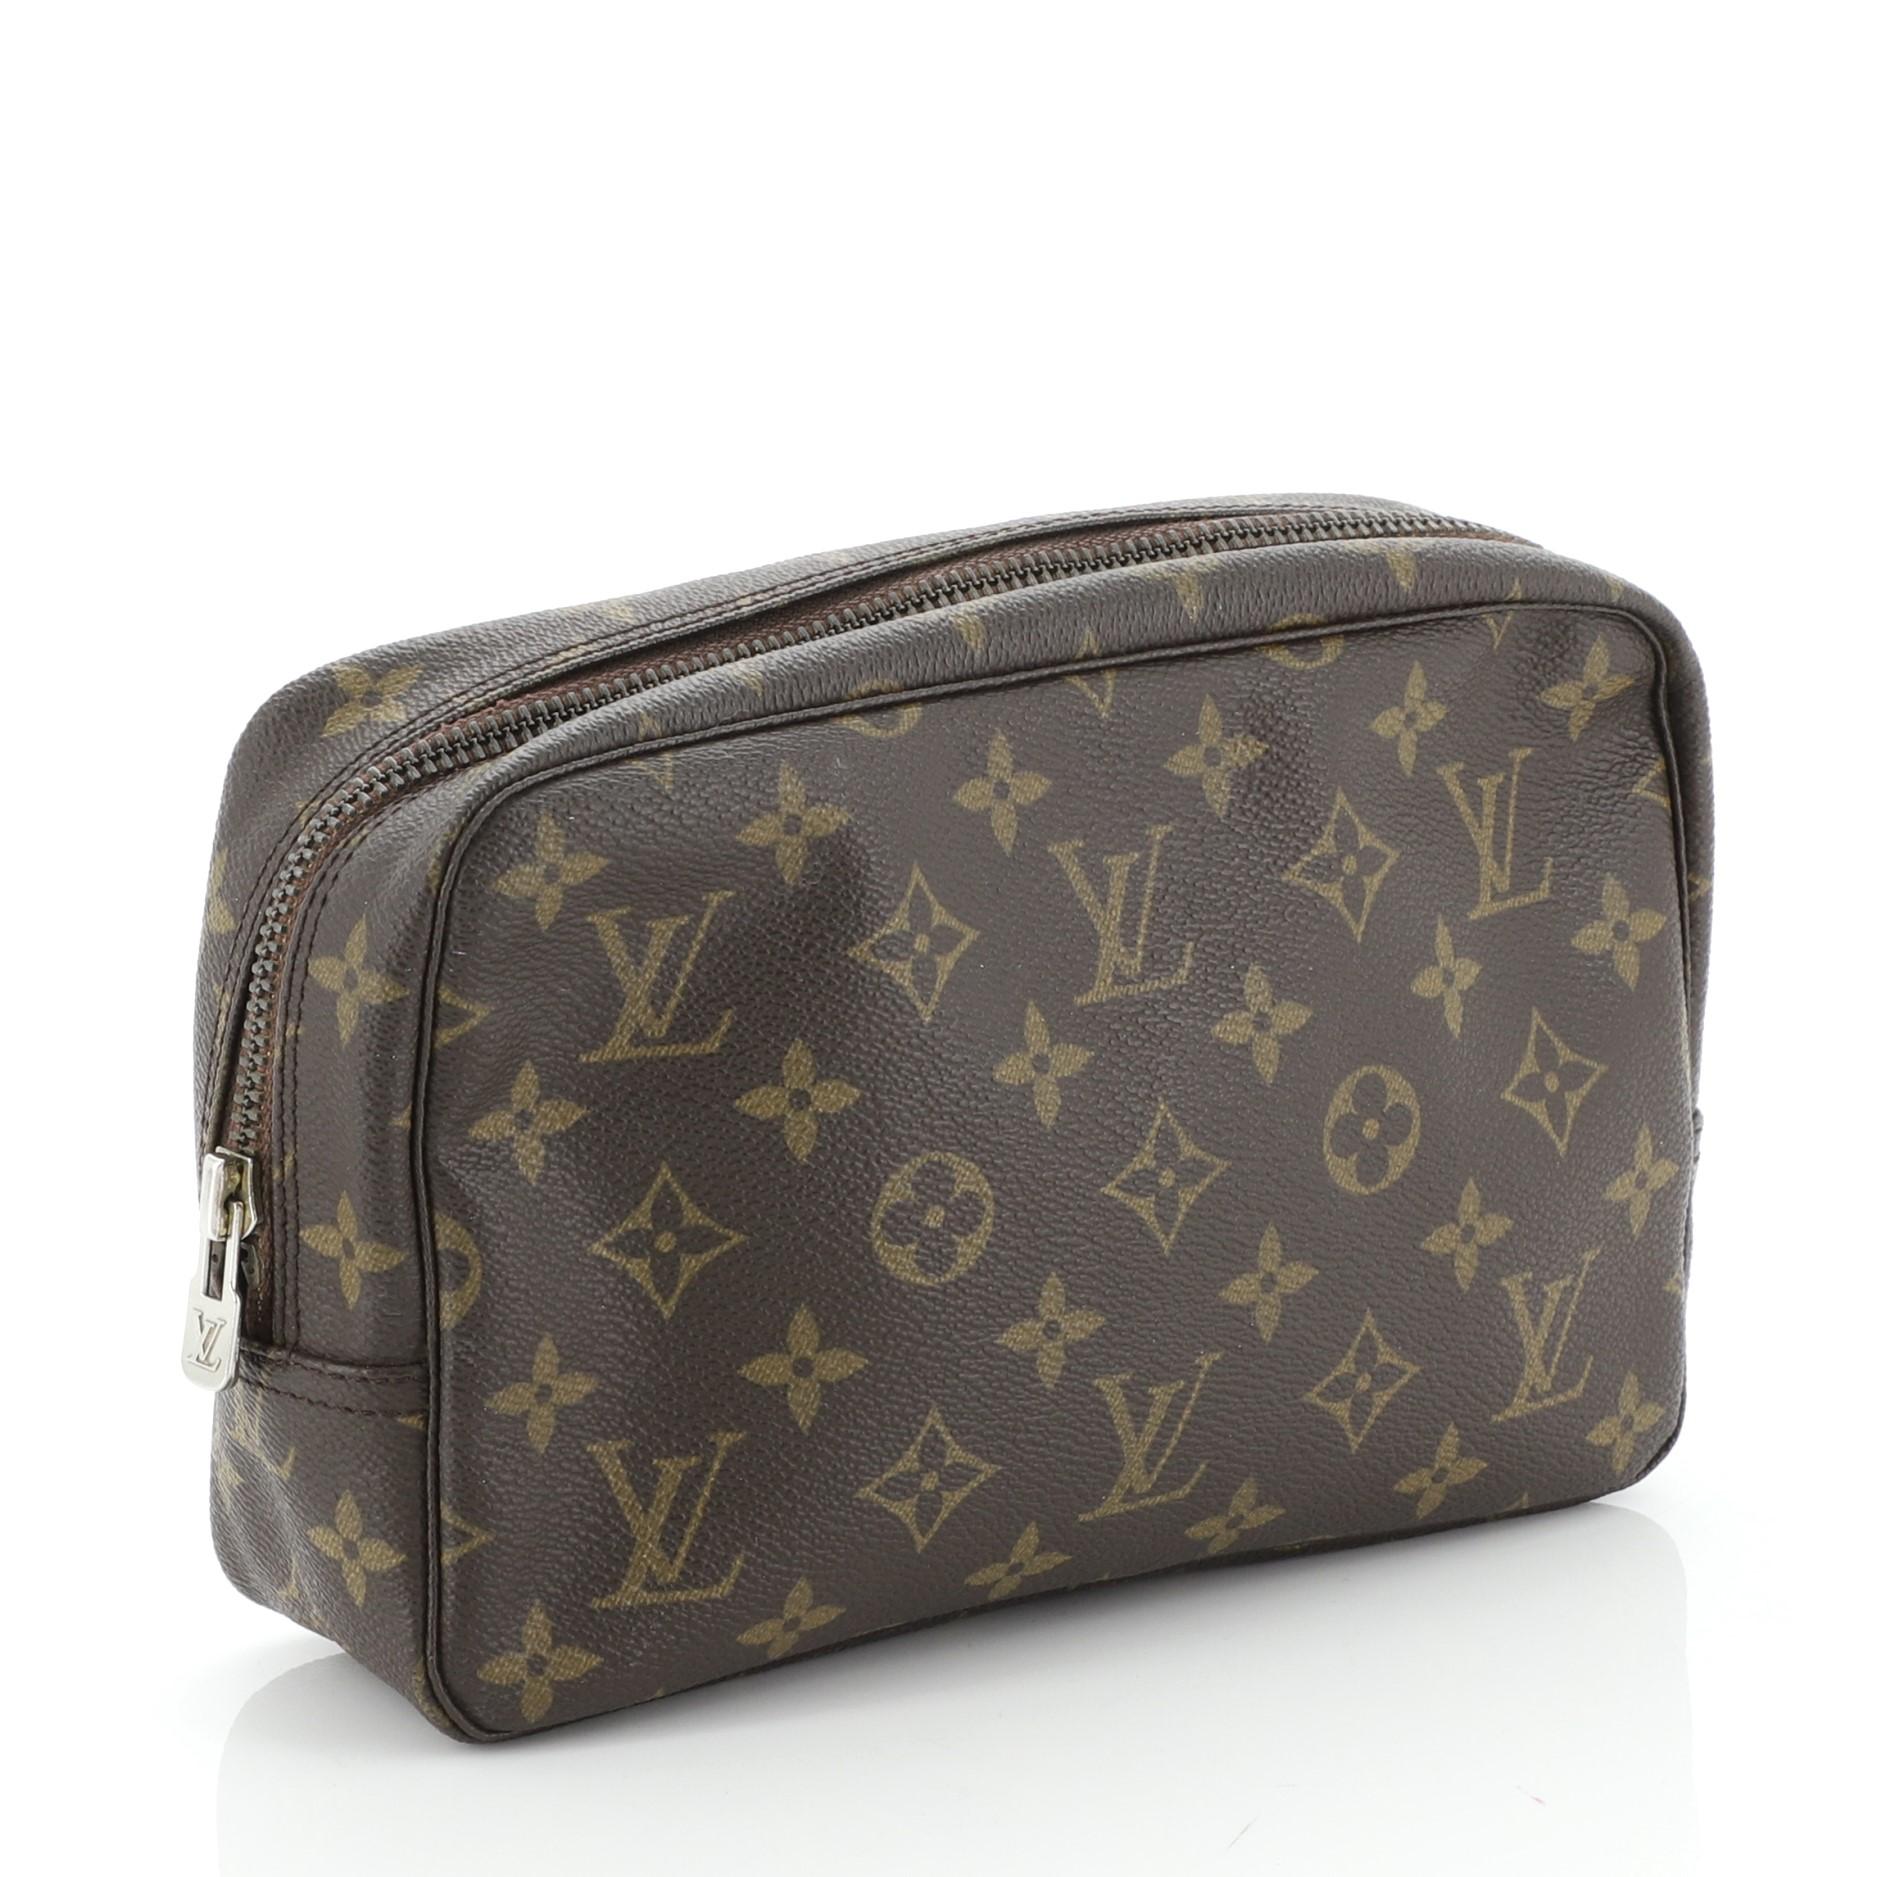 This Louis Vuitton Trousse Toiletry Pouch Monogram Canvas 23, crafted in brown monogram coated canvas, features gold-tone hardware. Its zip closure opens to a neutral leather interior. 

Condition: Damaged. Missing code. Wear and creasing on